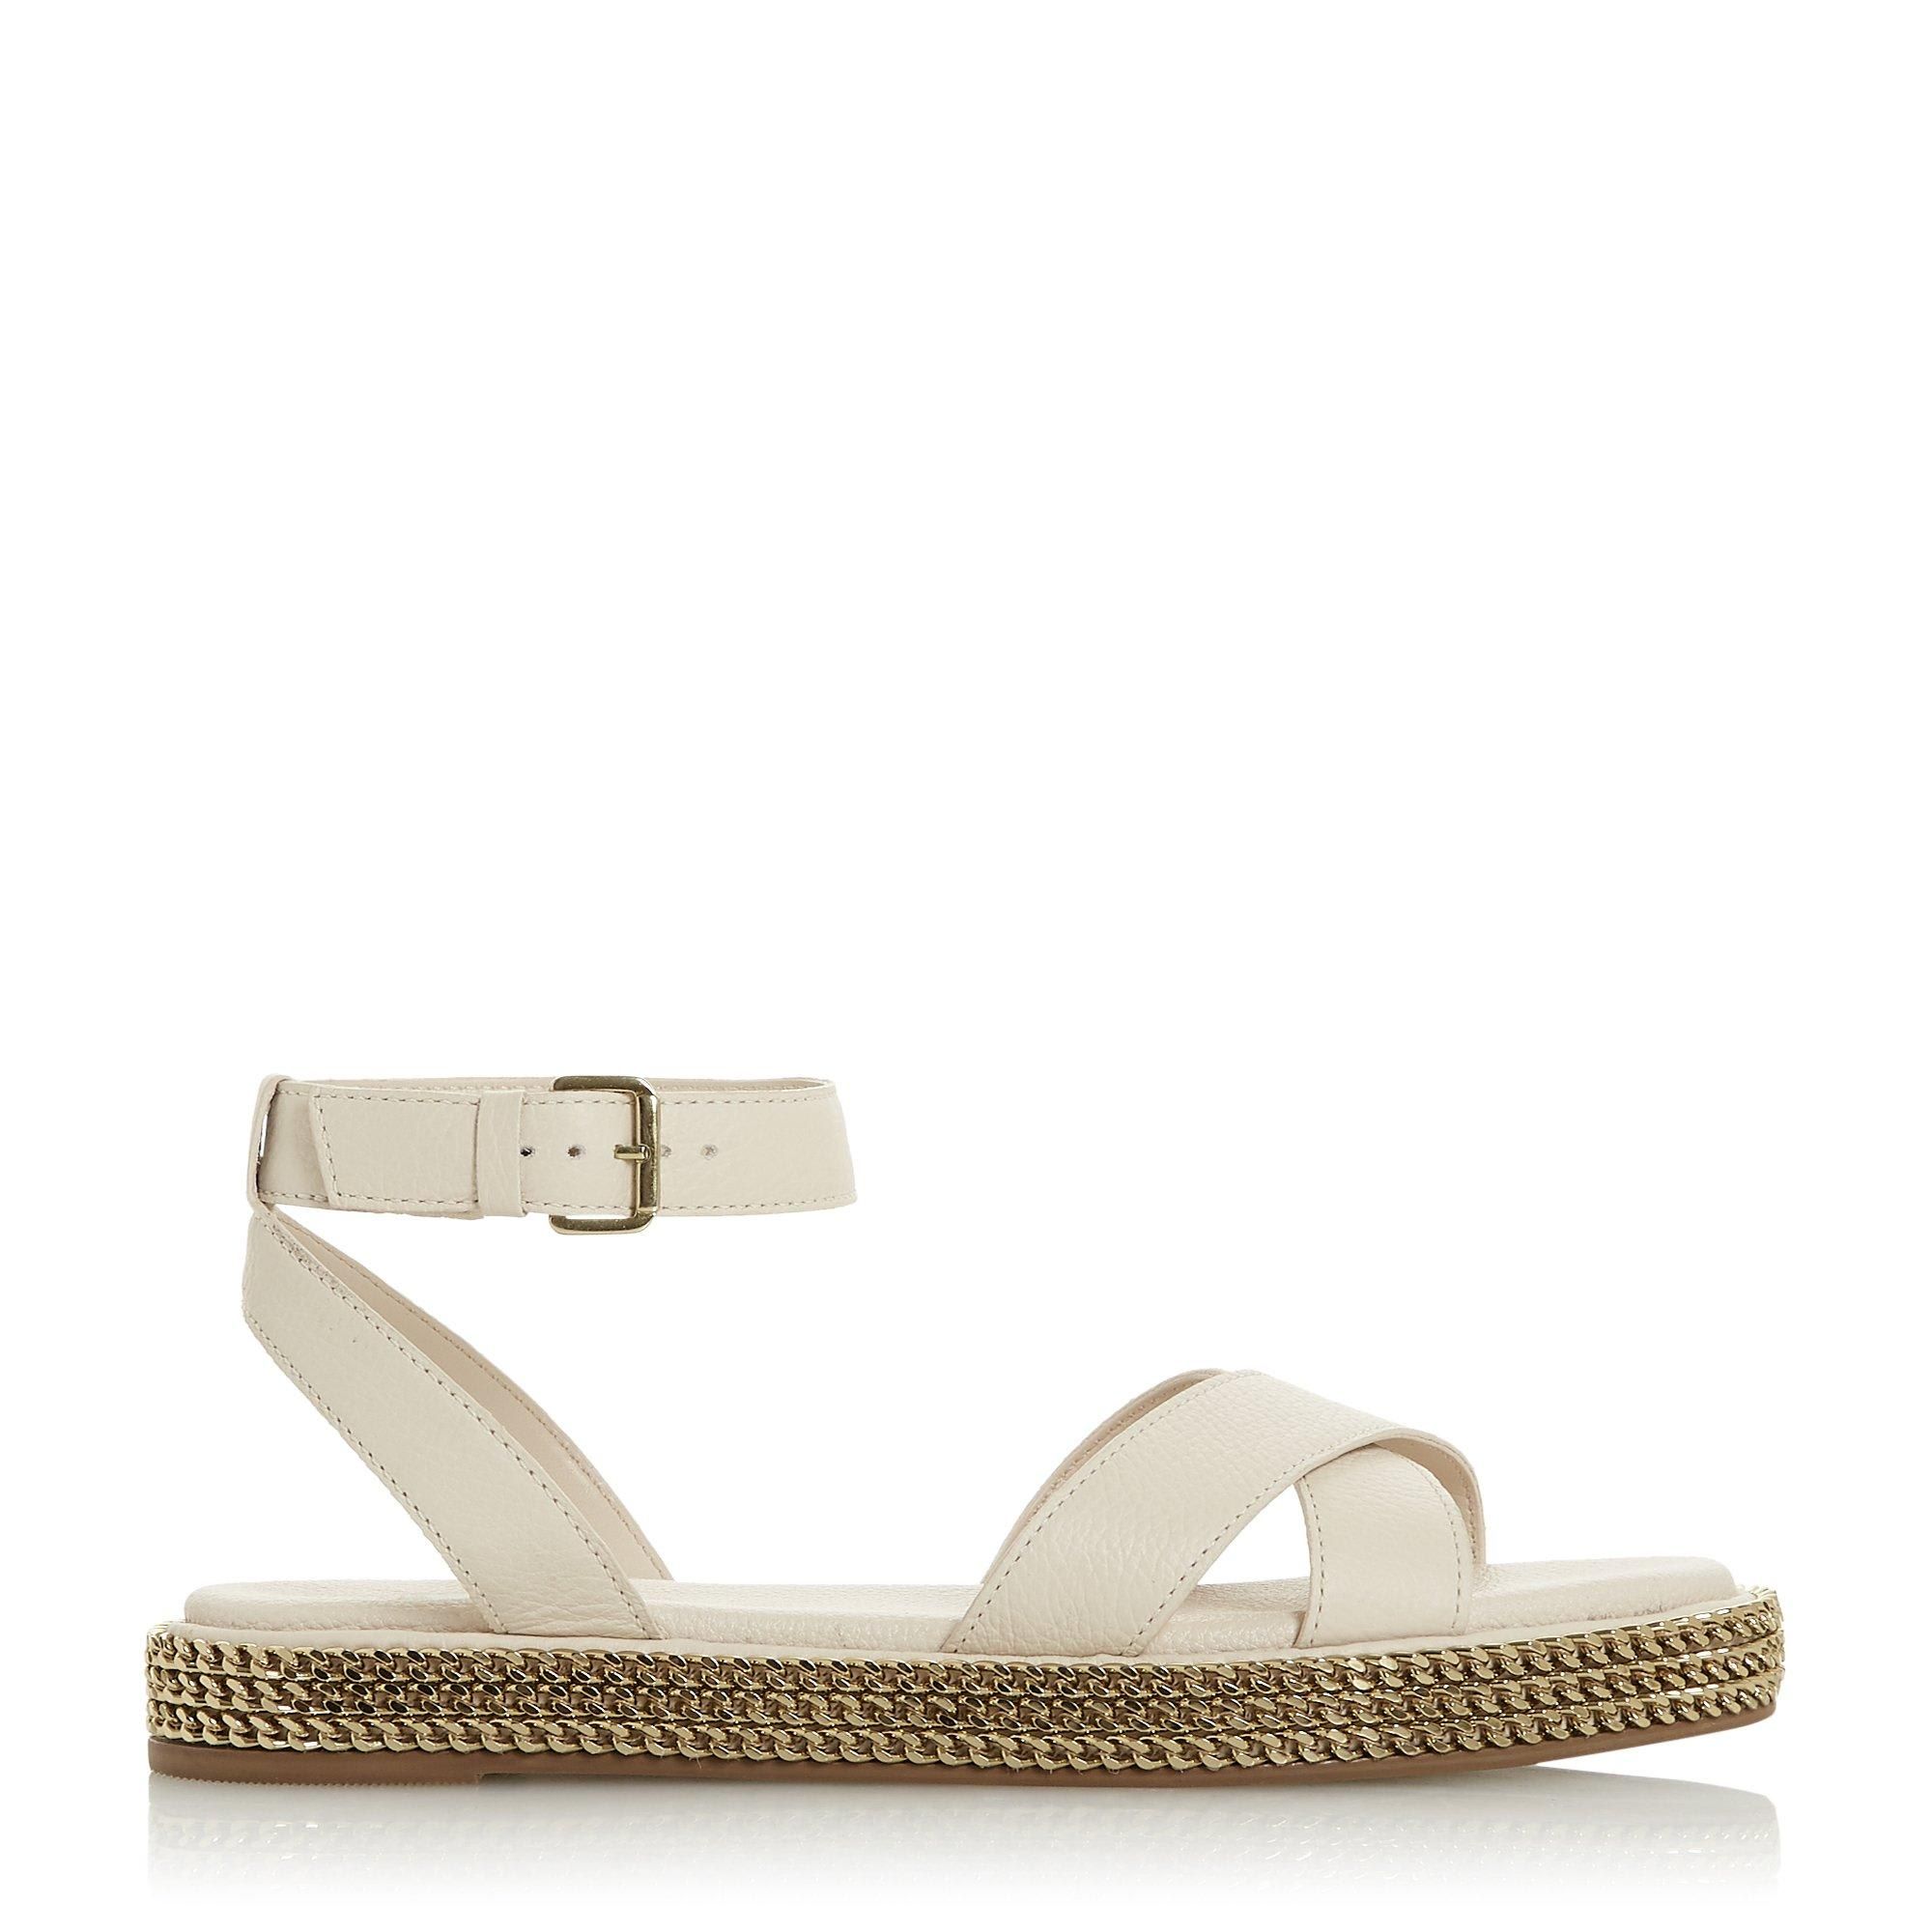 Toughen up summer and holiday edits with this sandal. Fitted with a buckled ankle strap and crossed bands at the upper. Its comfortable chunky sole is embellished with striking chains.